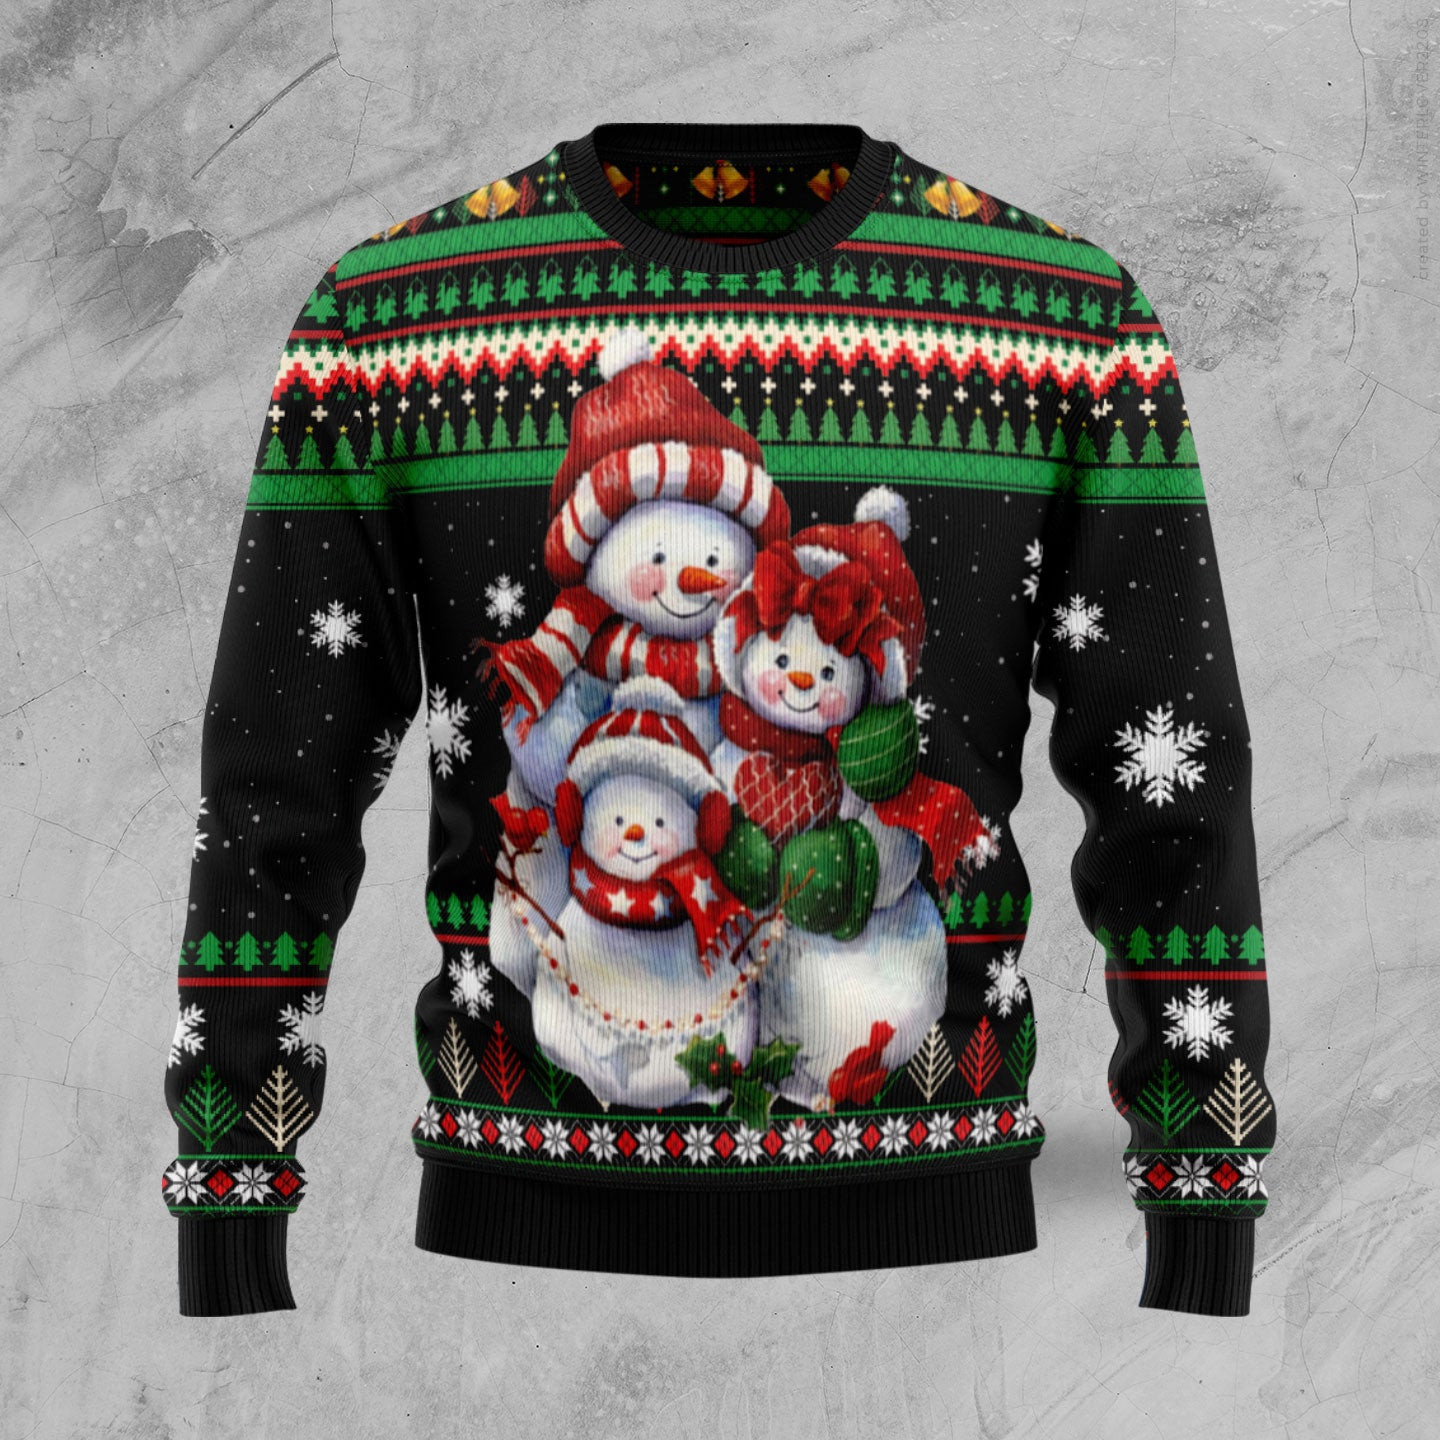 Lovely Snowman Ugly Christmas Sweater, Ugly Sweater For Men Women, Holiday Sweater